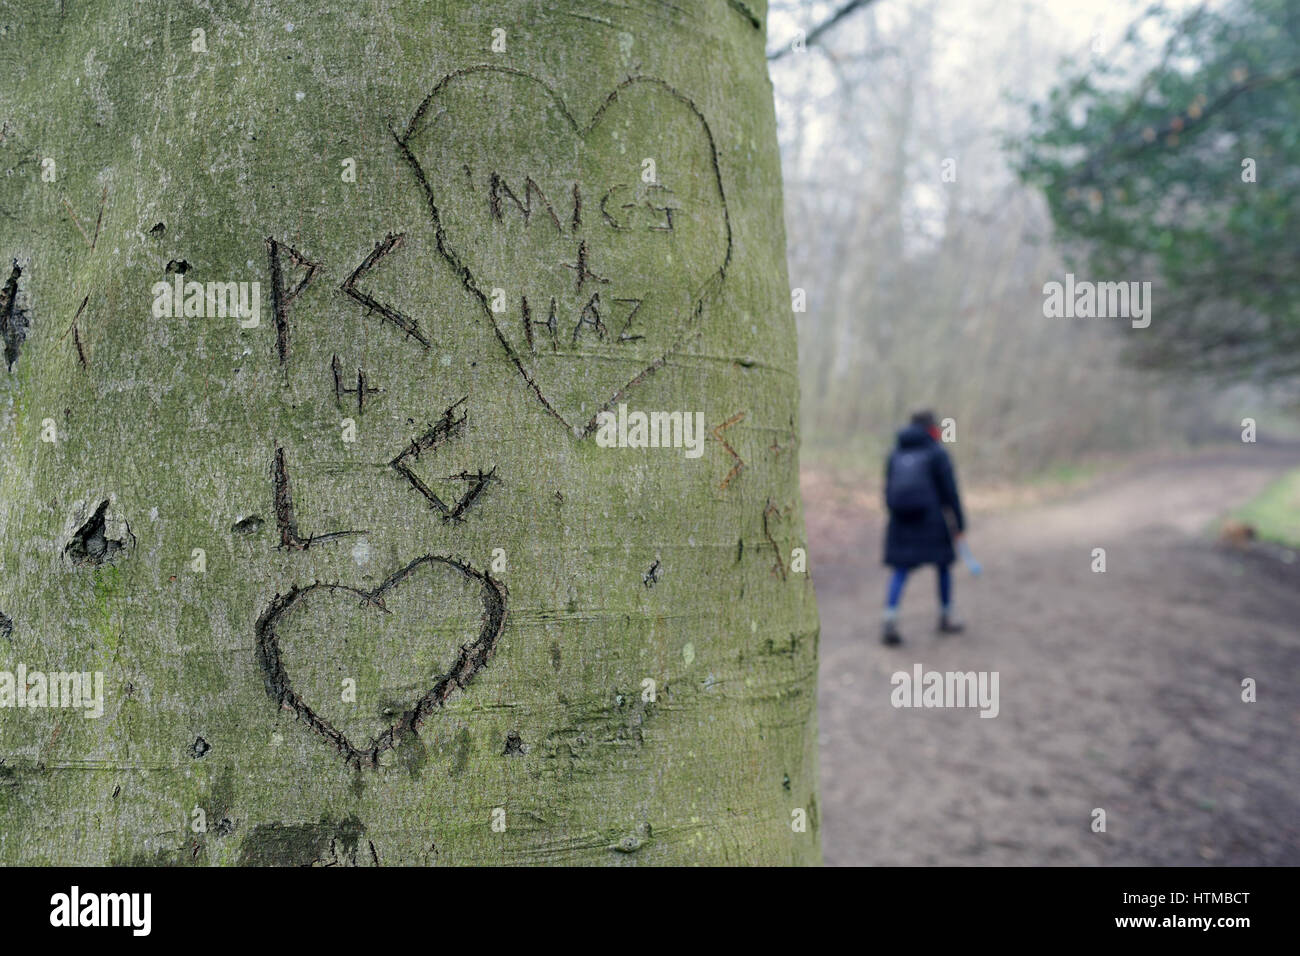 Hearts carved in a tree Stock Photo